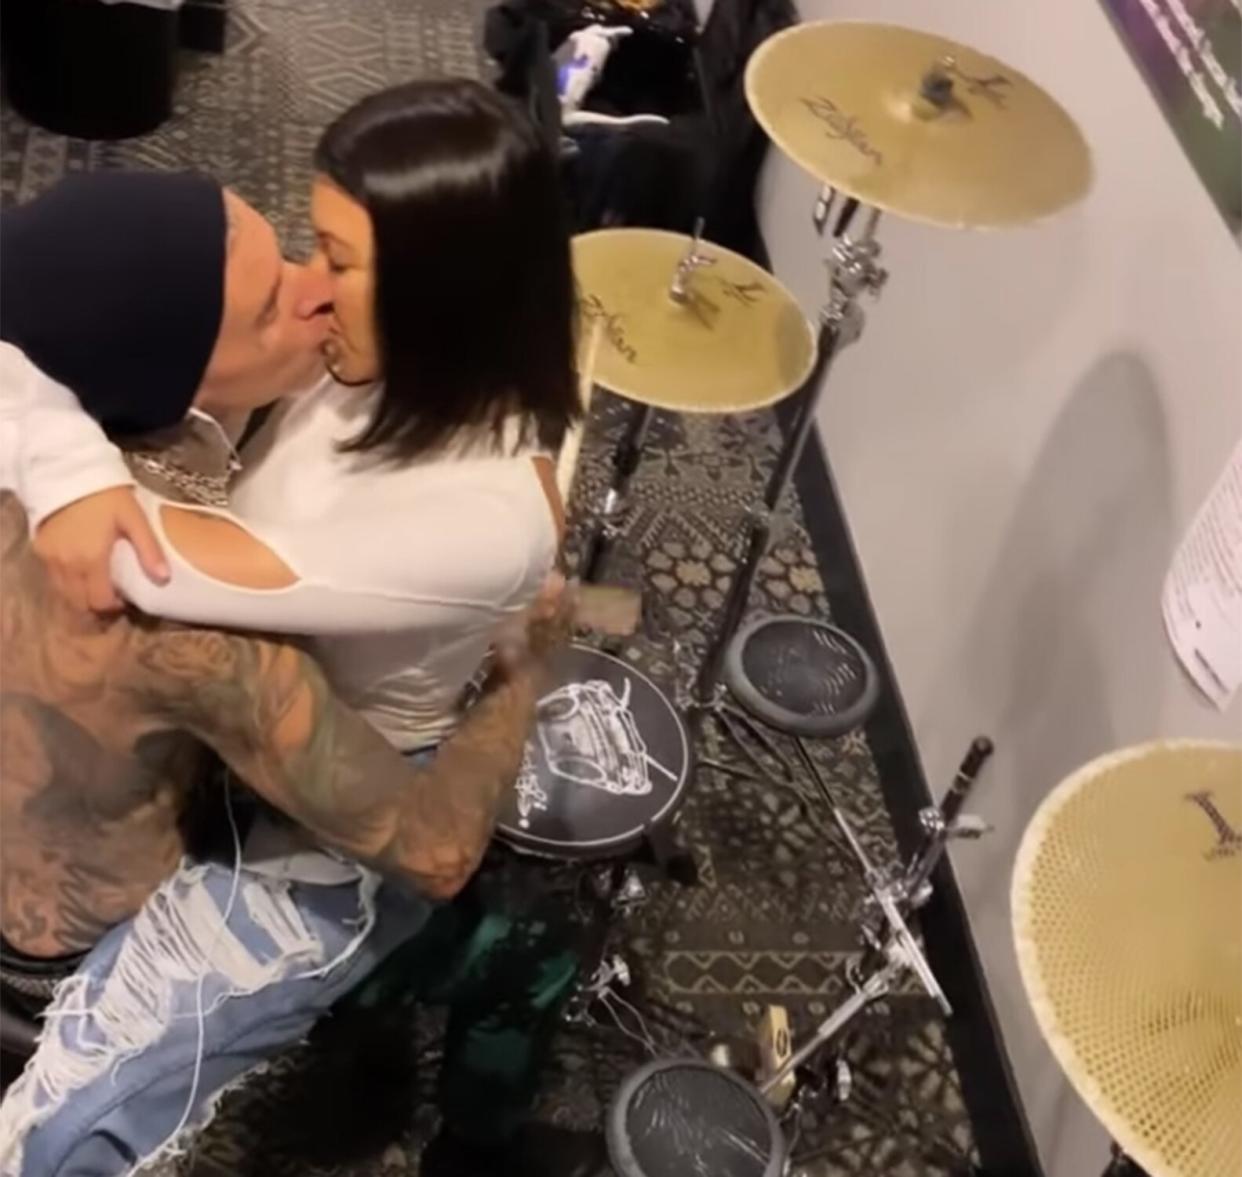 Travis Barker Plays the Drums with Kourtney on His Lap